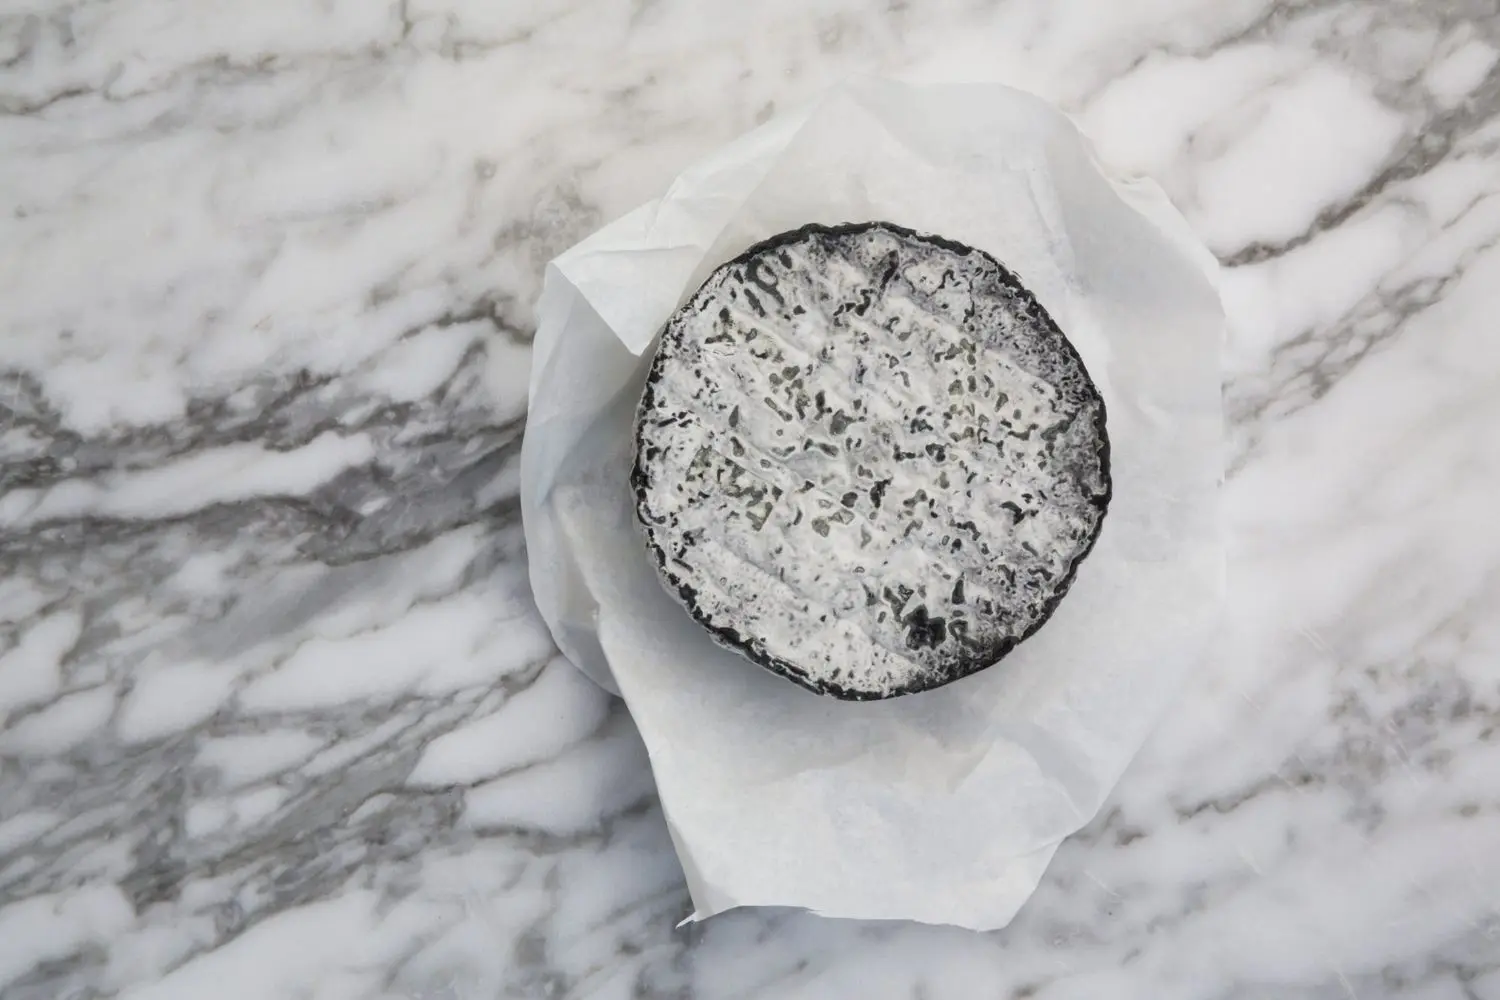 smoked goat cheese recipe - What makes goat cheese taste better